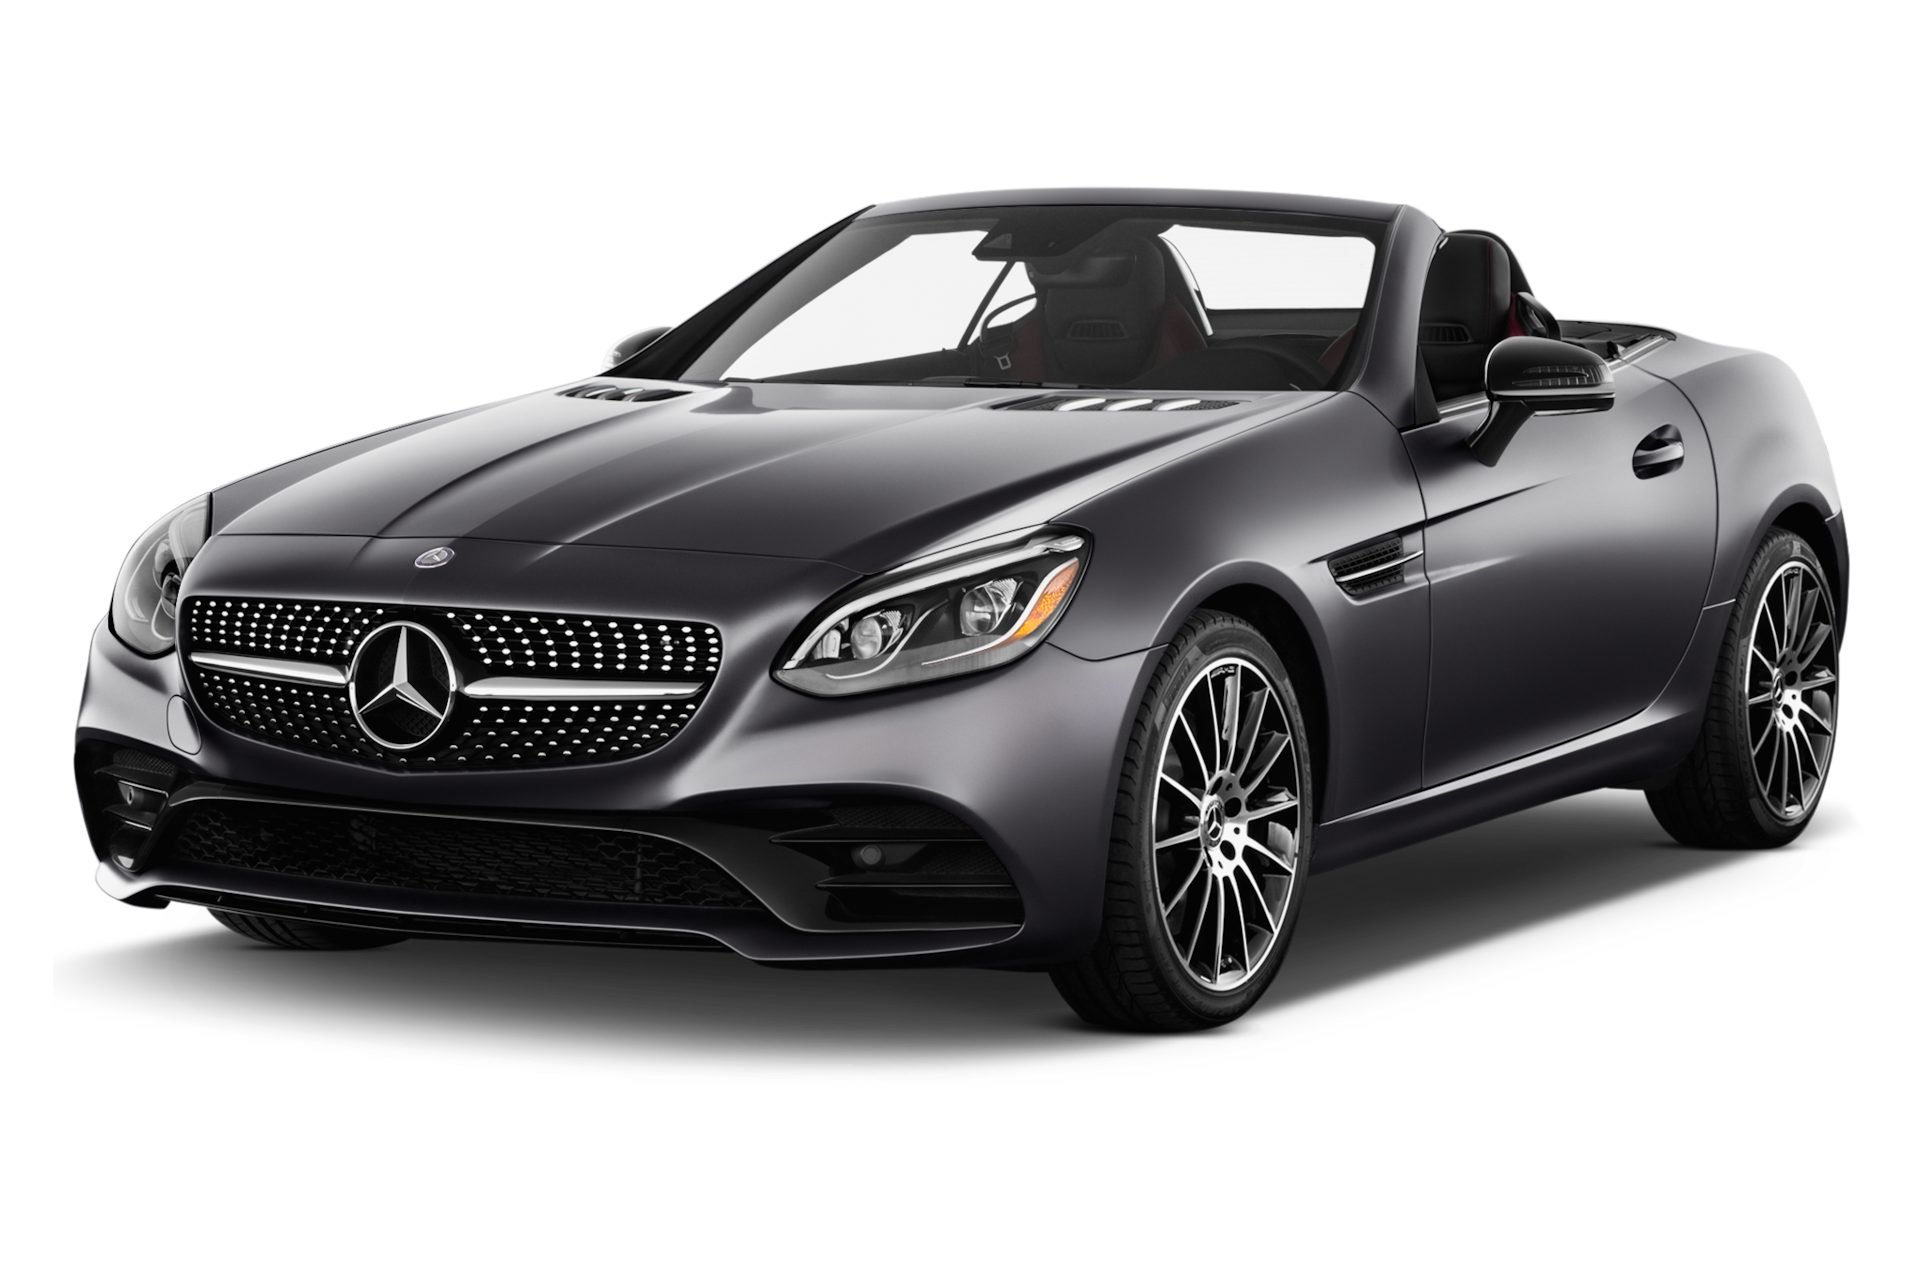 2017 Mercedes-Benz SLC-Class Prices, Reviews, and Photos - MotorTrend